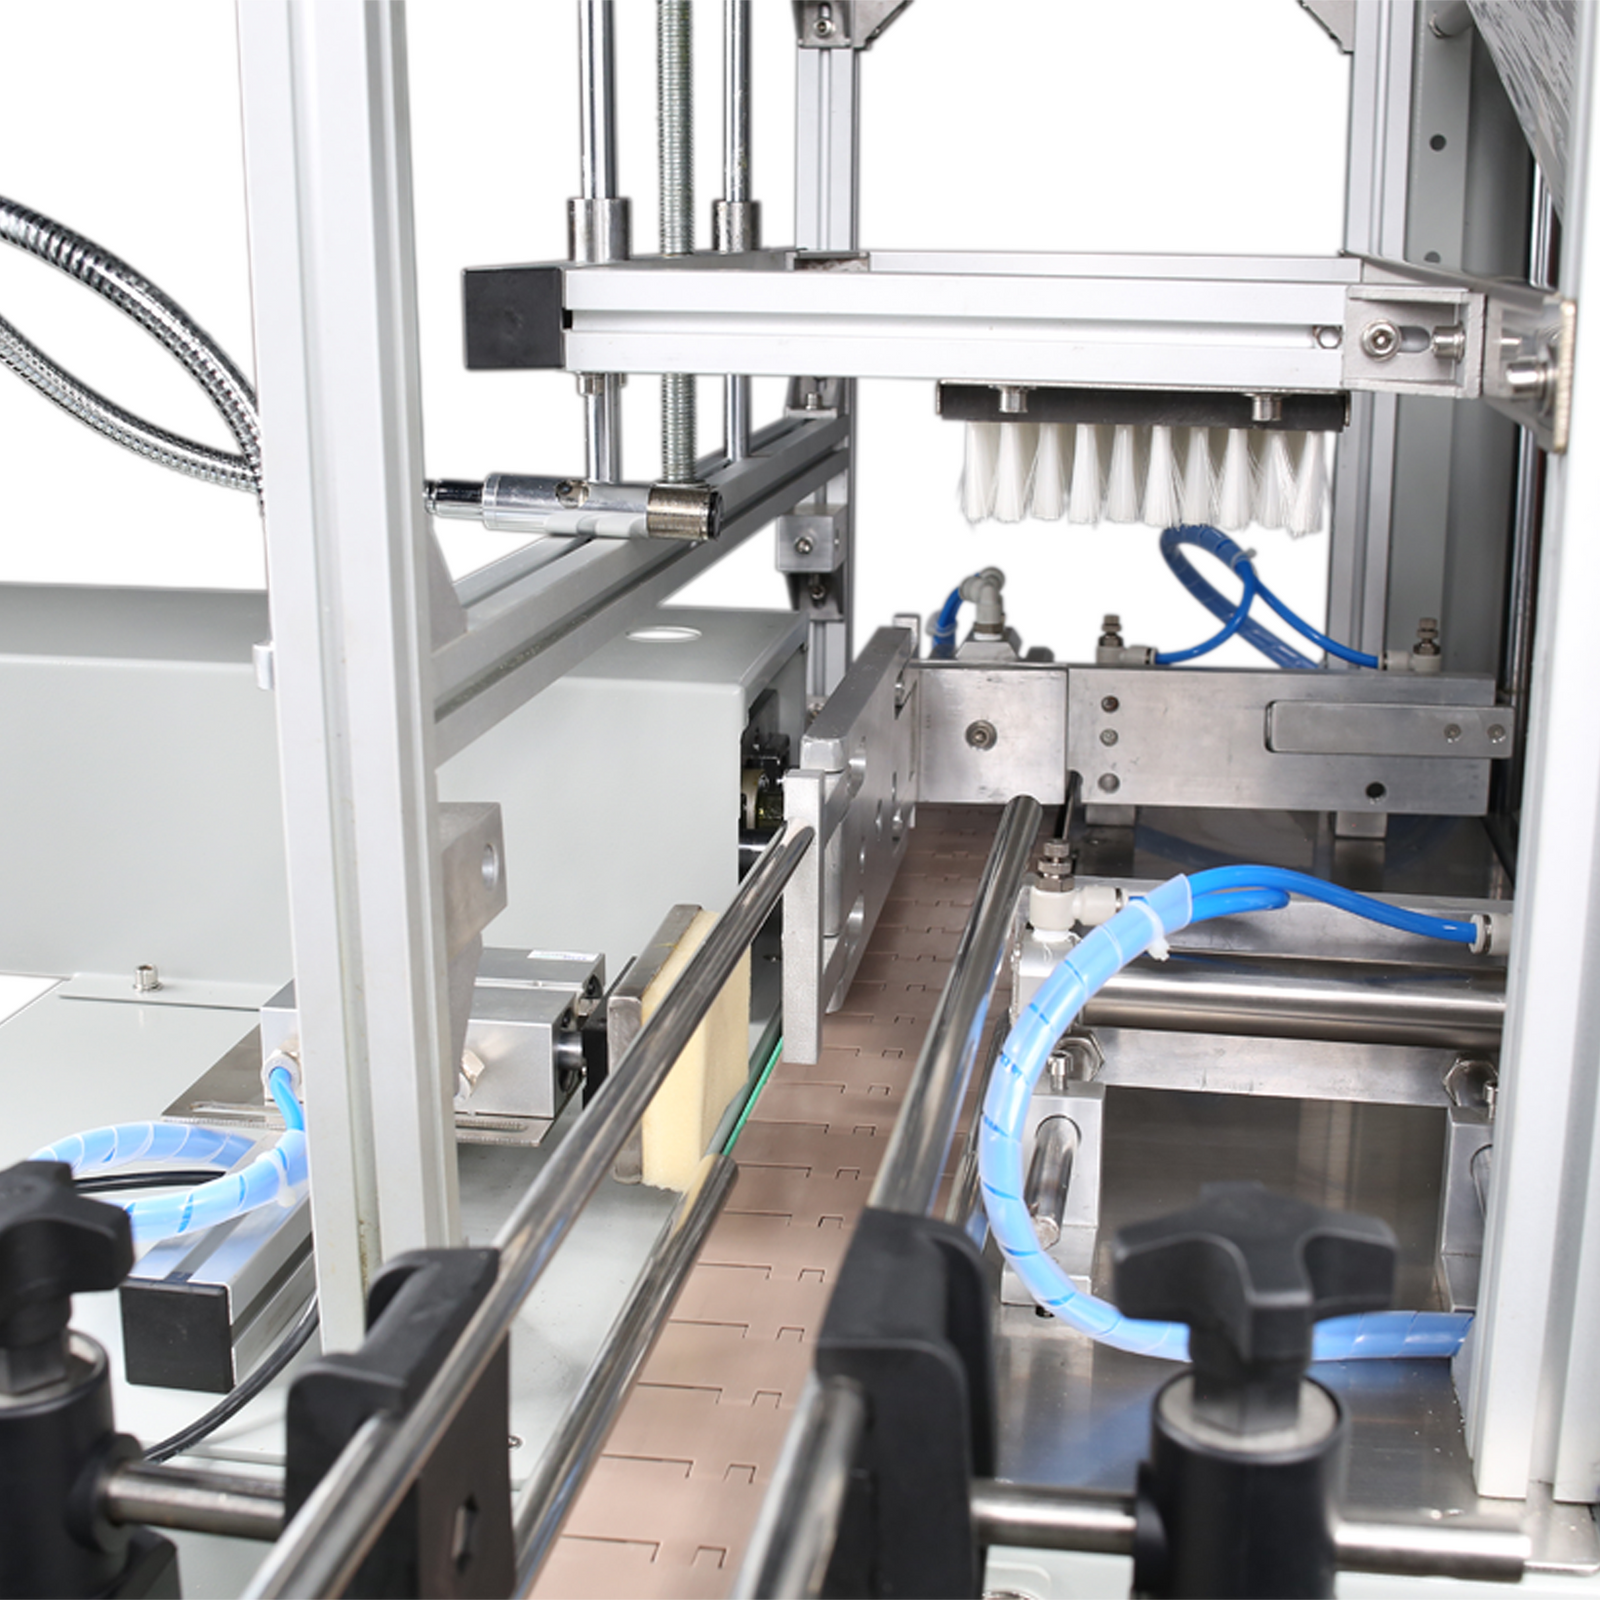 Motorized conveyor on the automatic shrink sleeve wrapping system